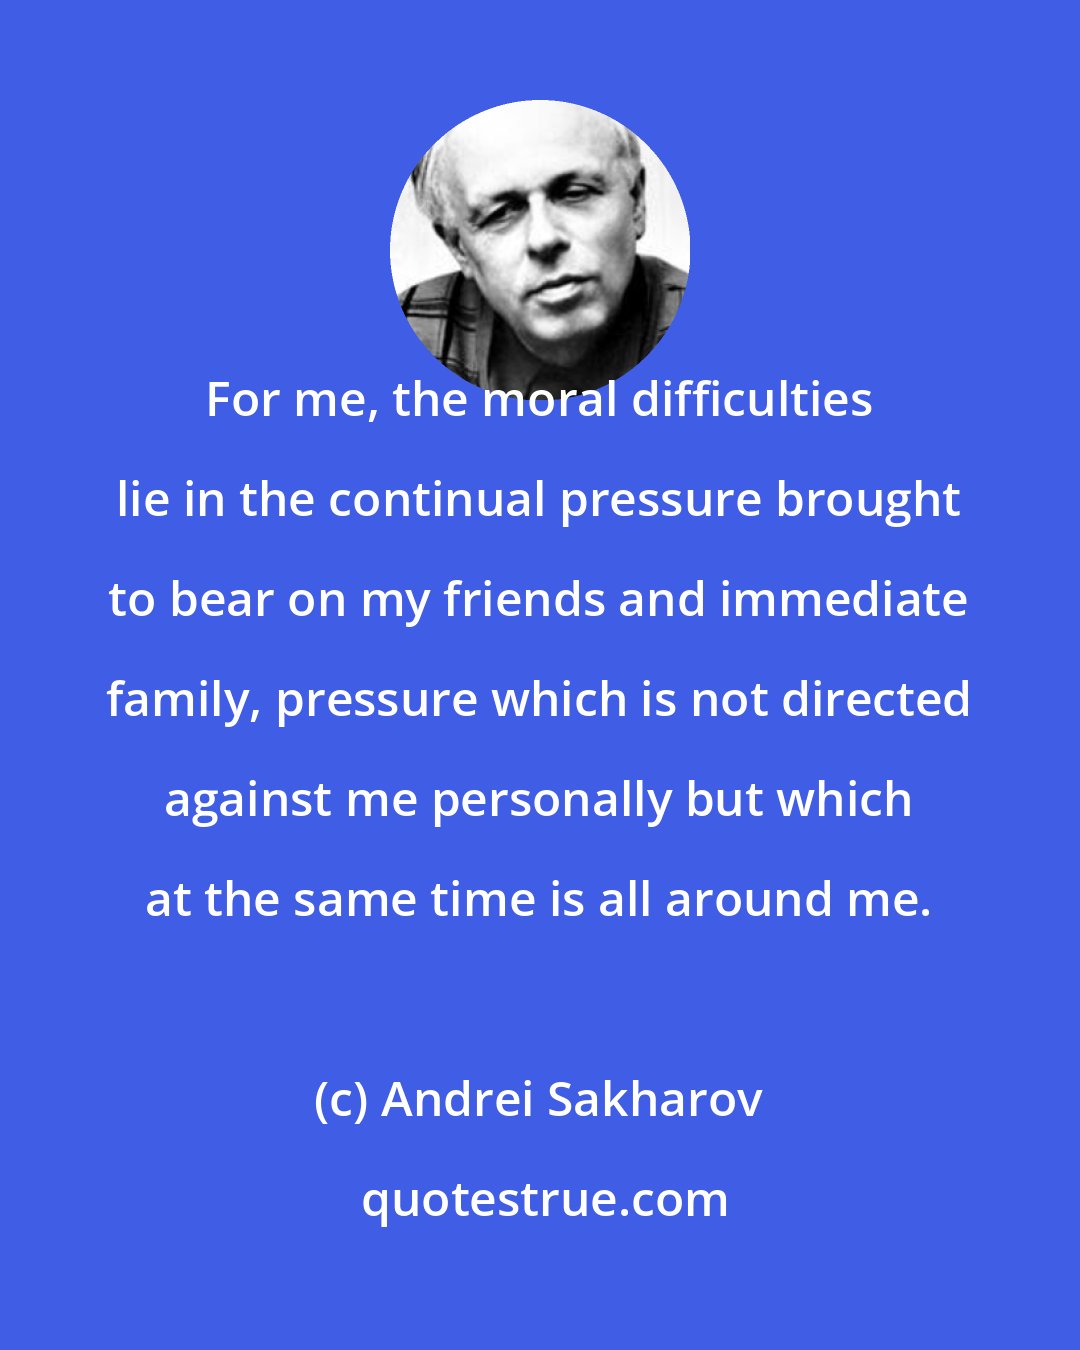 Andrei Sakharov: For me, the moral difficulties lie in the continual pressure brought to bear on my friends and immediate family, pressure which is not directed against me personally but which at the same time is all around me.